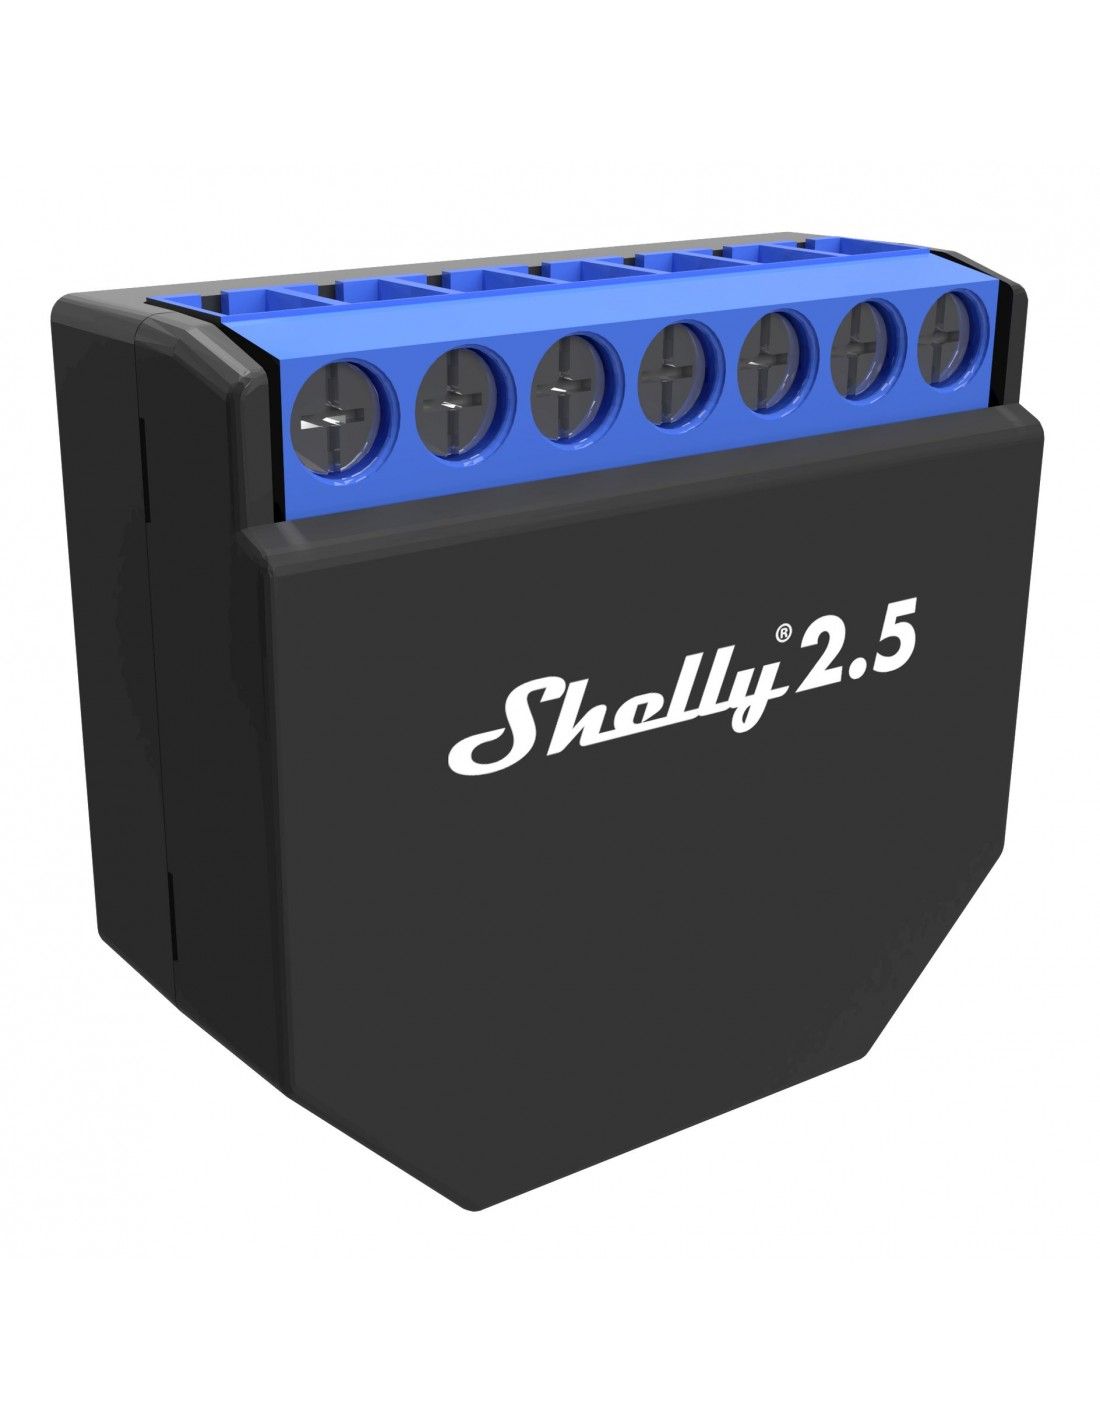 Shelly 2.5 Relay Light, Switch WiFi Smart Home Automation